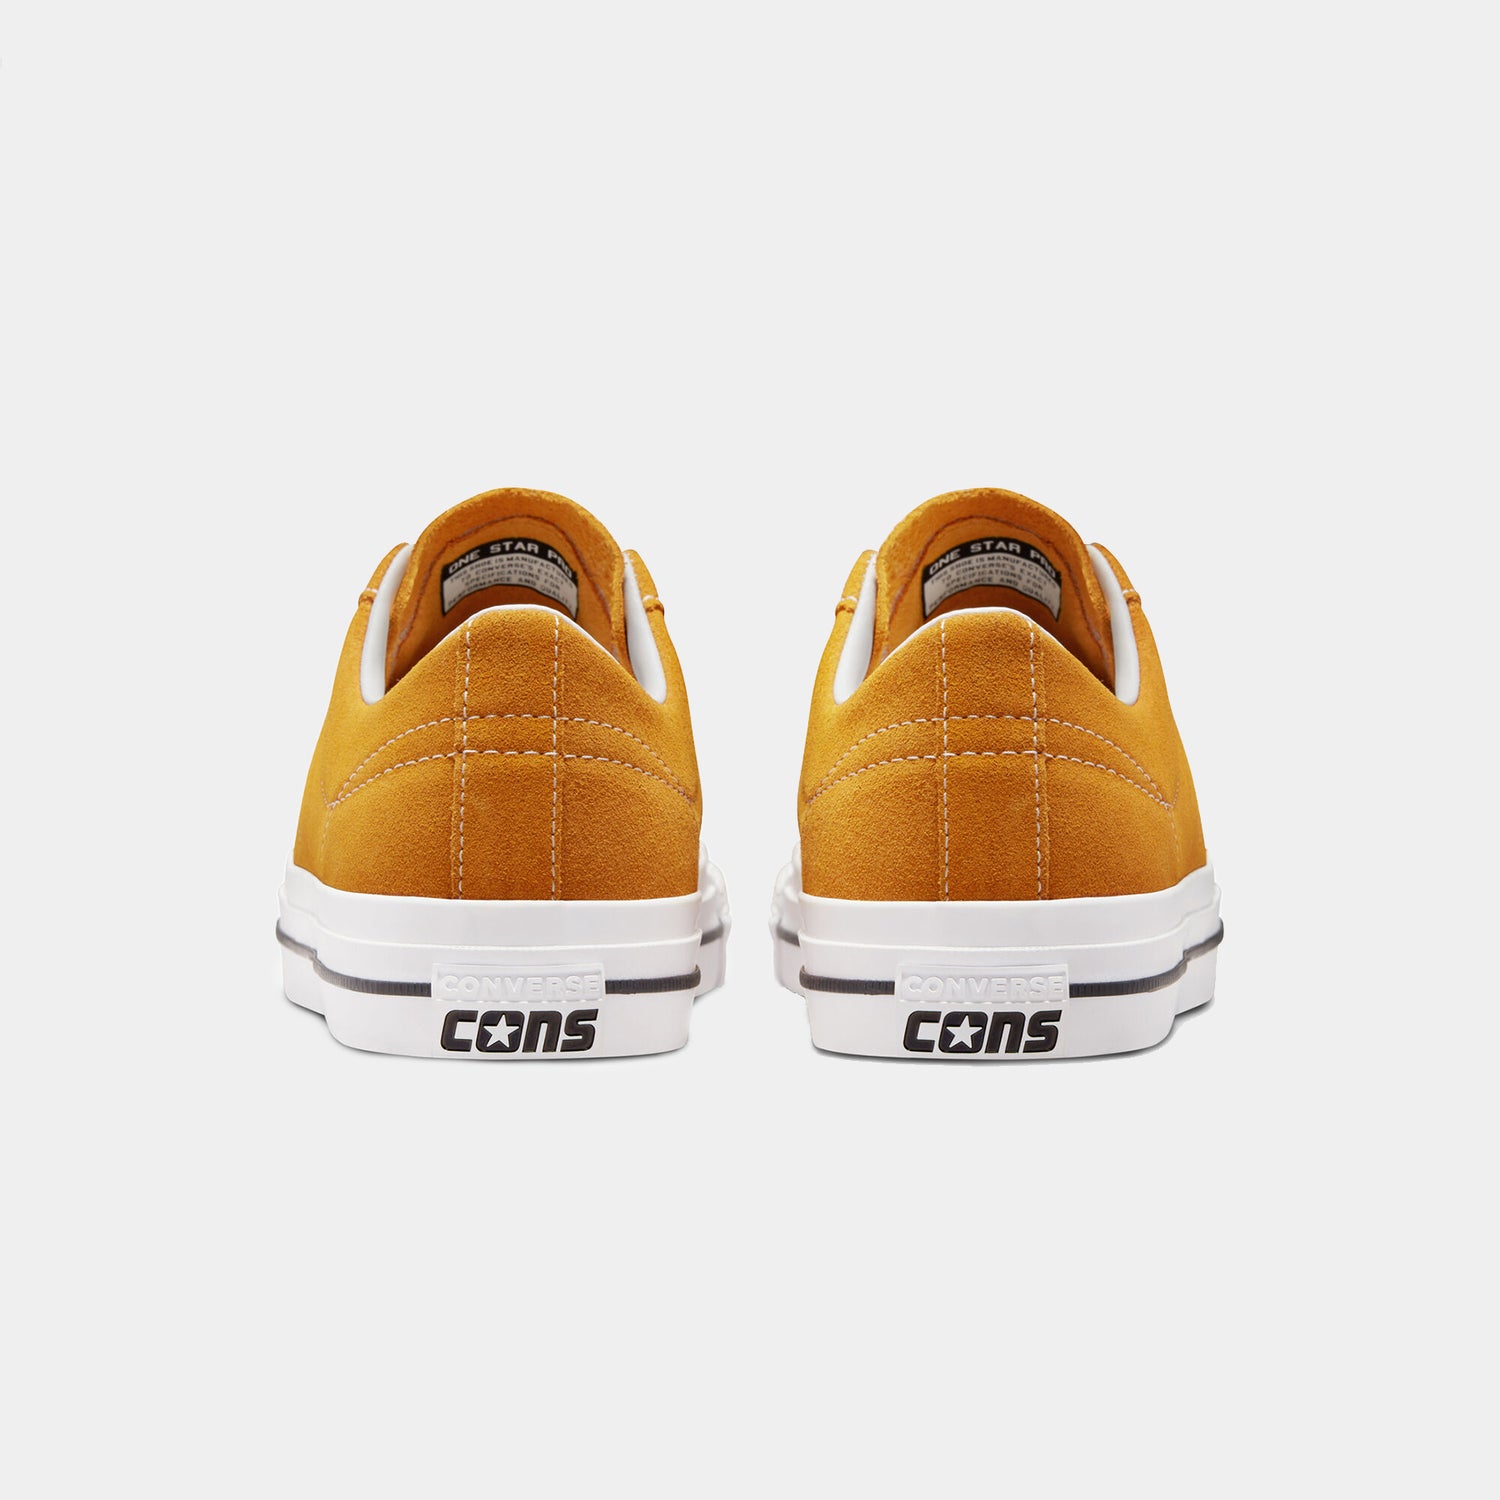 Converse - One Star Pro OX - Brown/Yellow